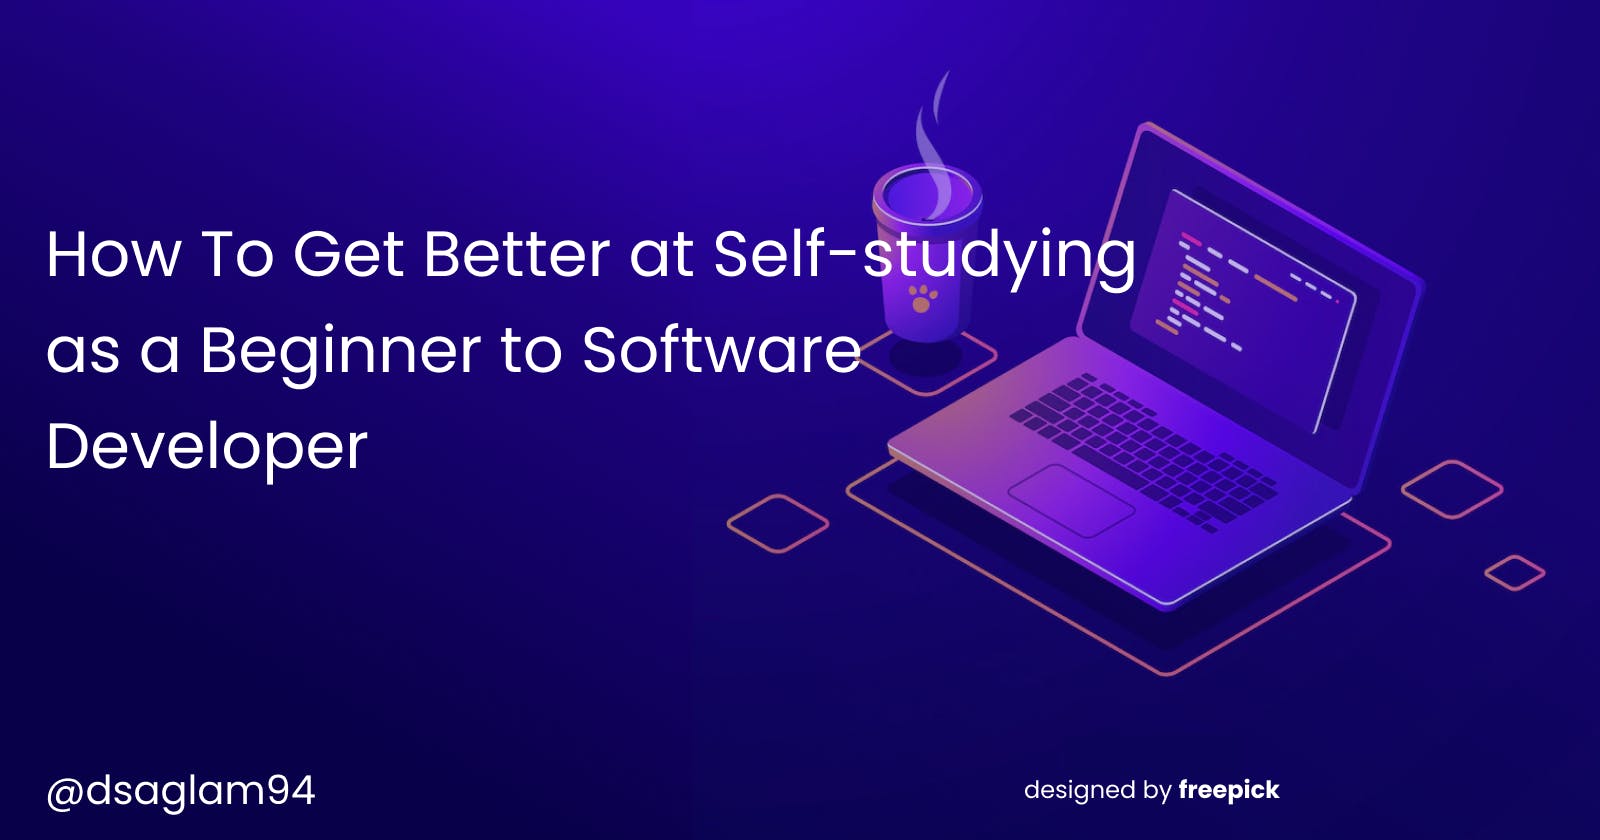 How To Get Better at Self-studying as a Beginner to Software Developer